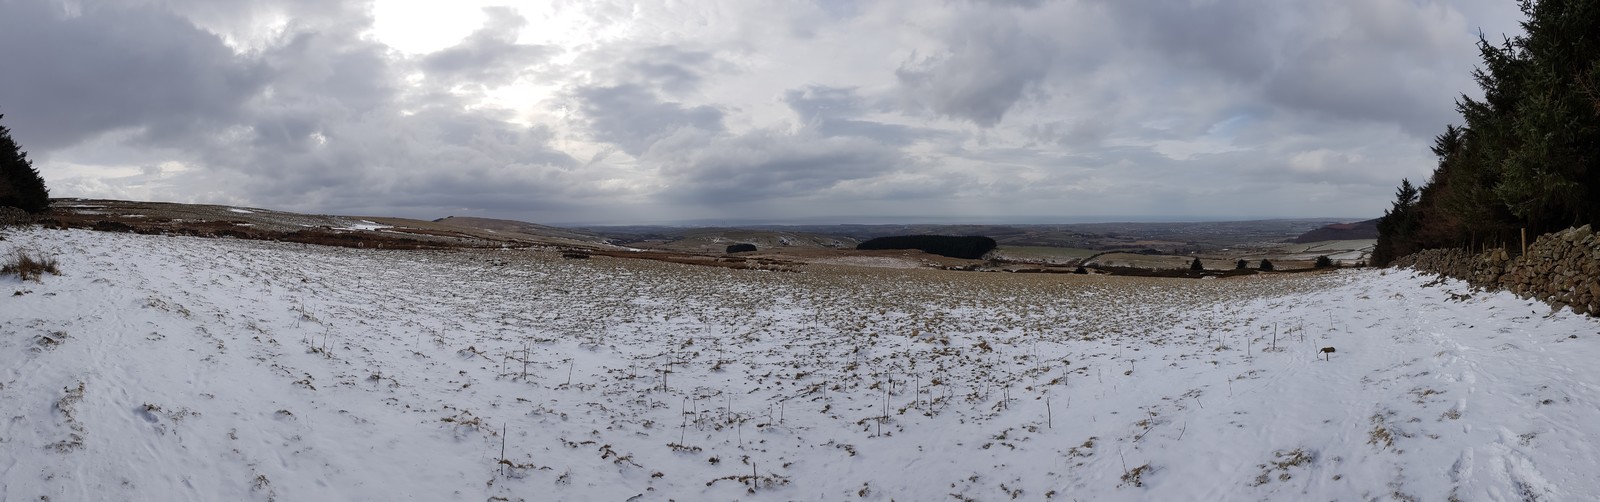 The beast from the east. Panorama